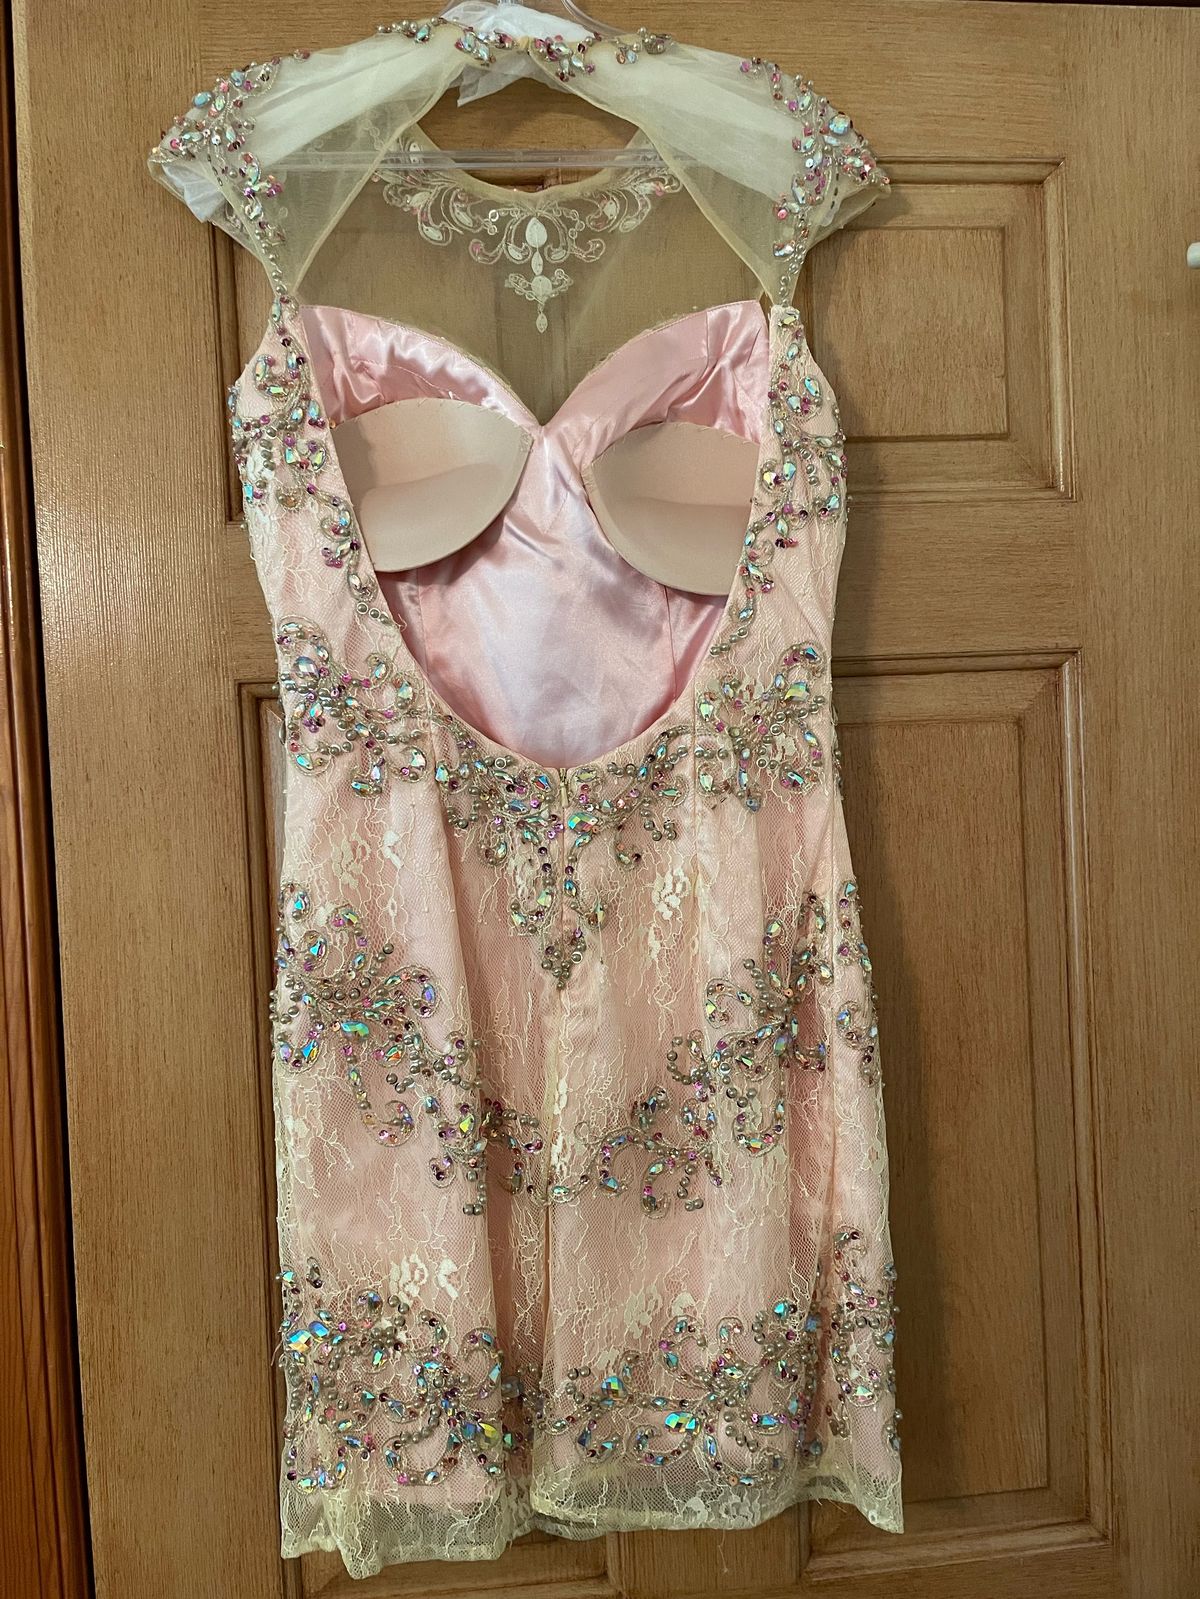 Alyce Paris Size 4 Pageant Pink Cocktail Dress on Queenly